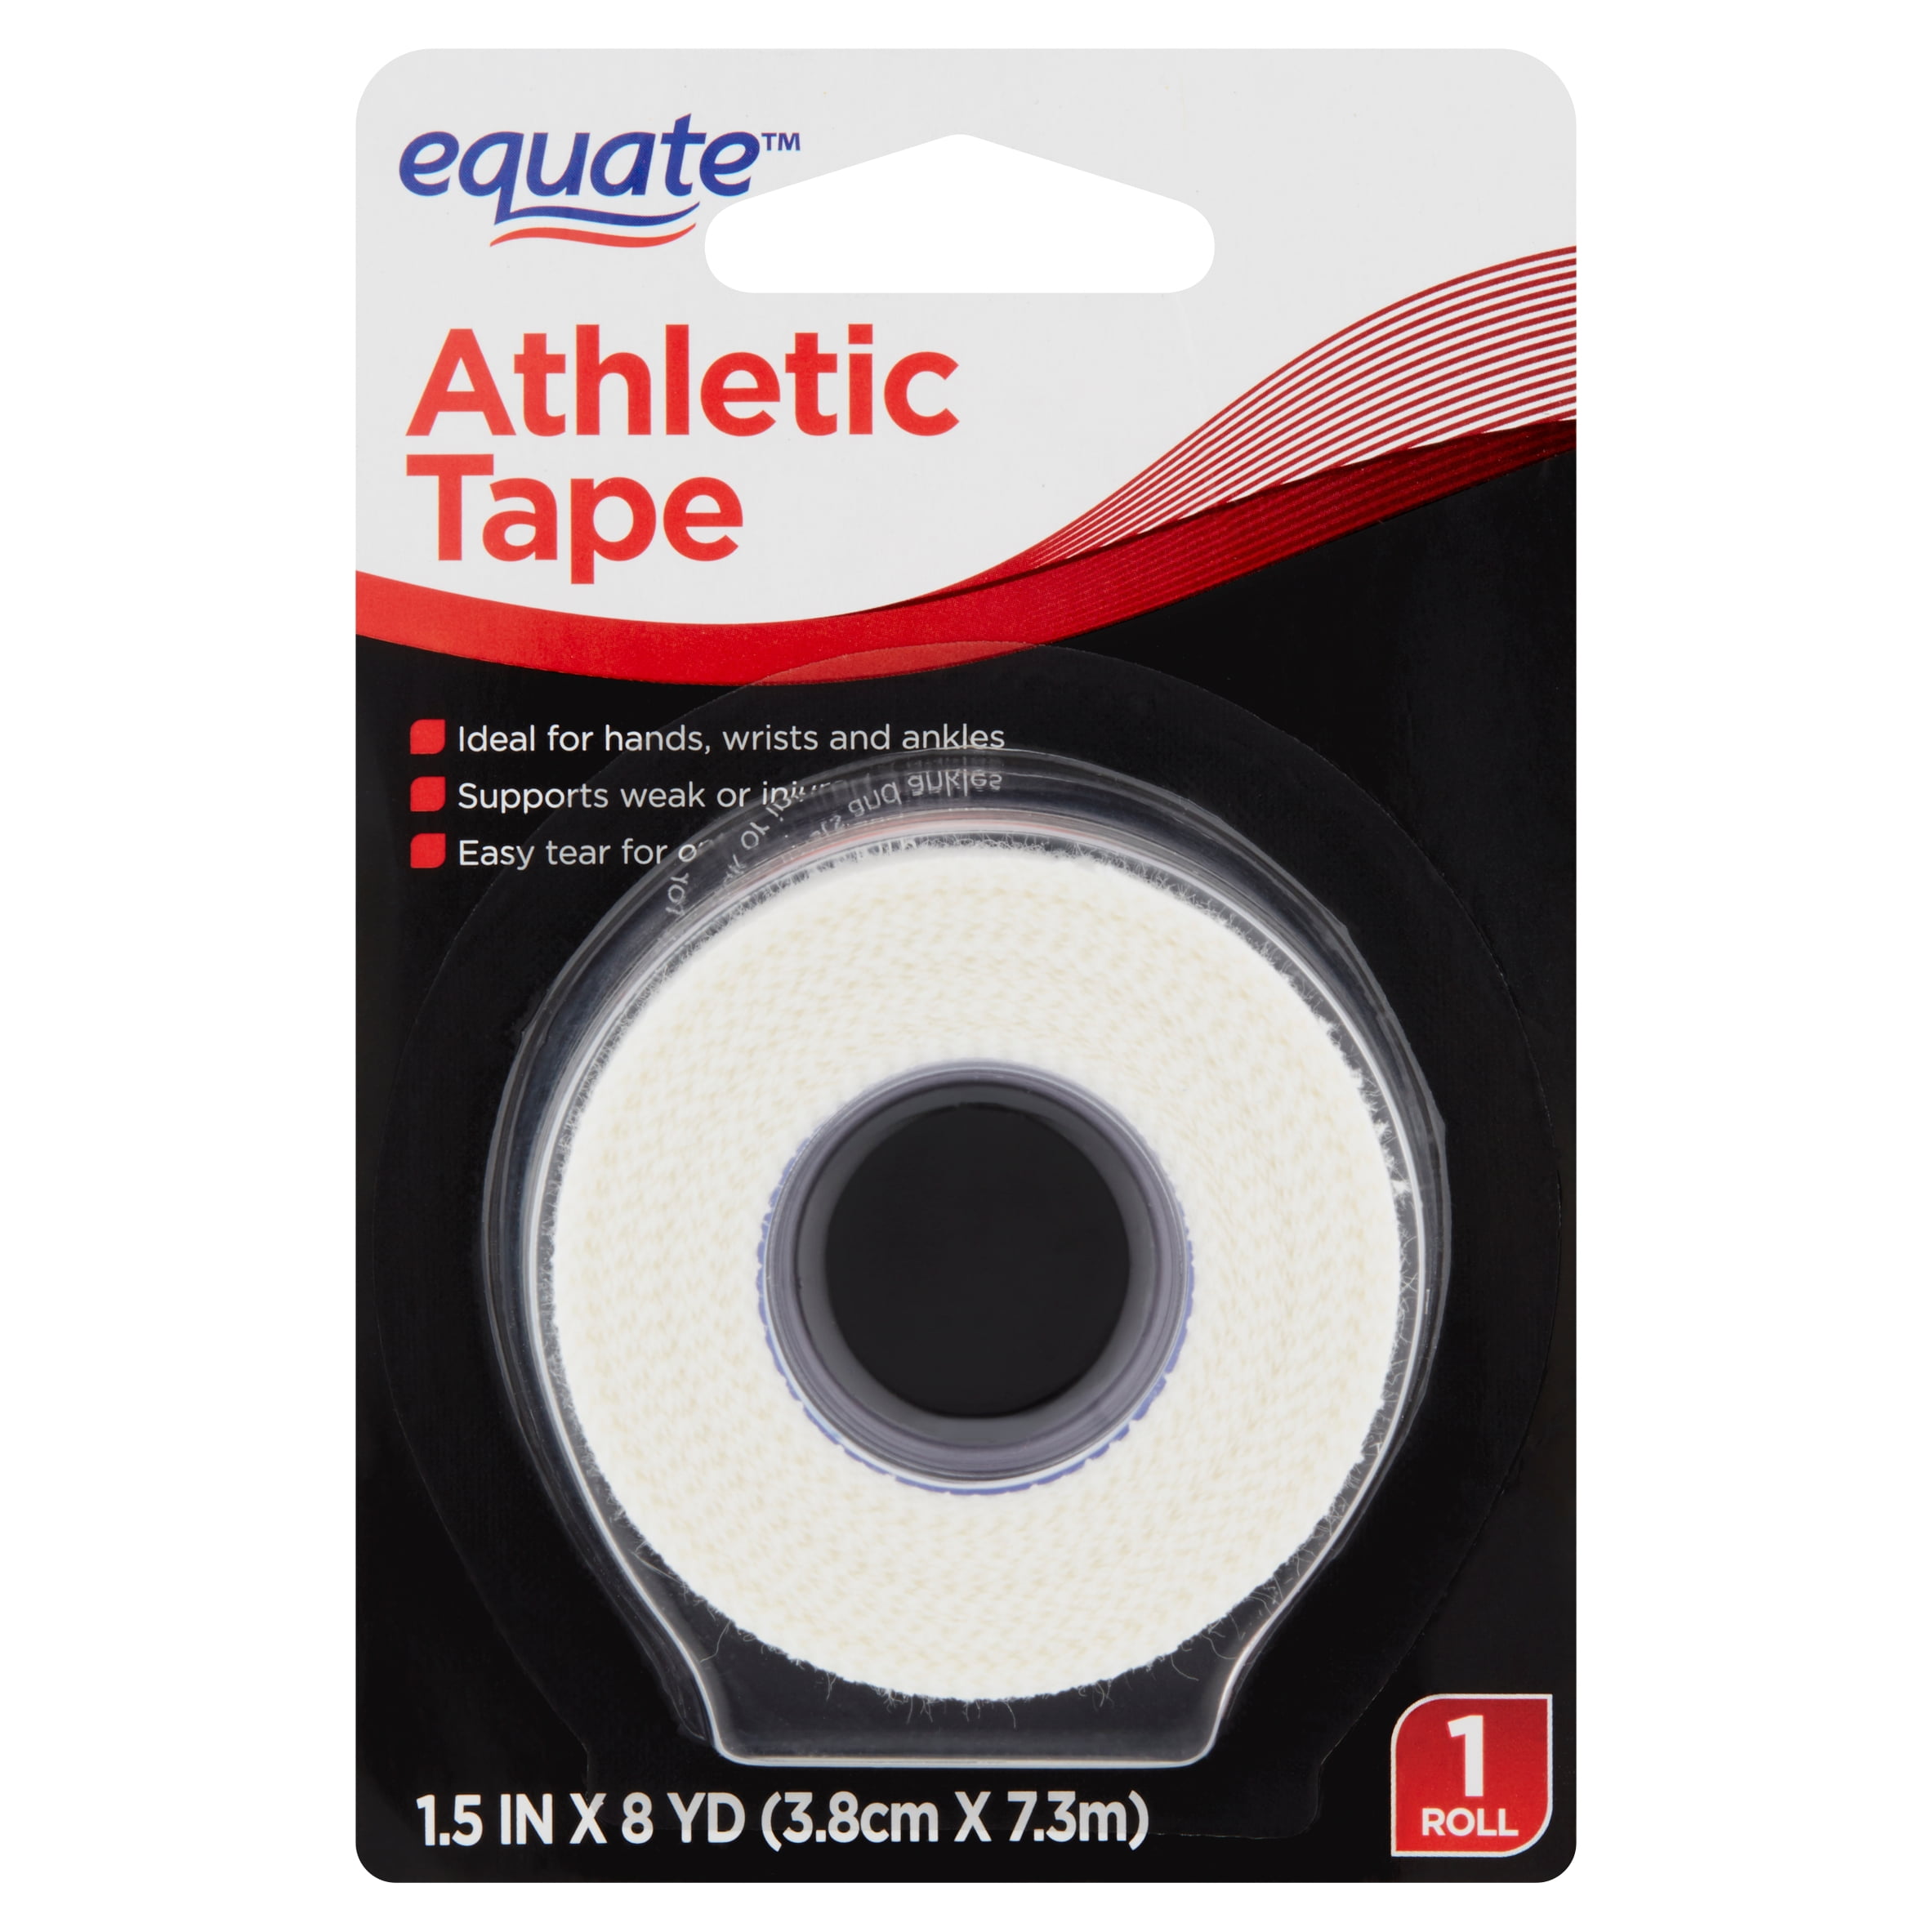 Easy Hand Tear Hand Wrap Strong Support WHITE Ankle Sock TAPE PROFESSIONAL SPORTS Football